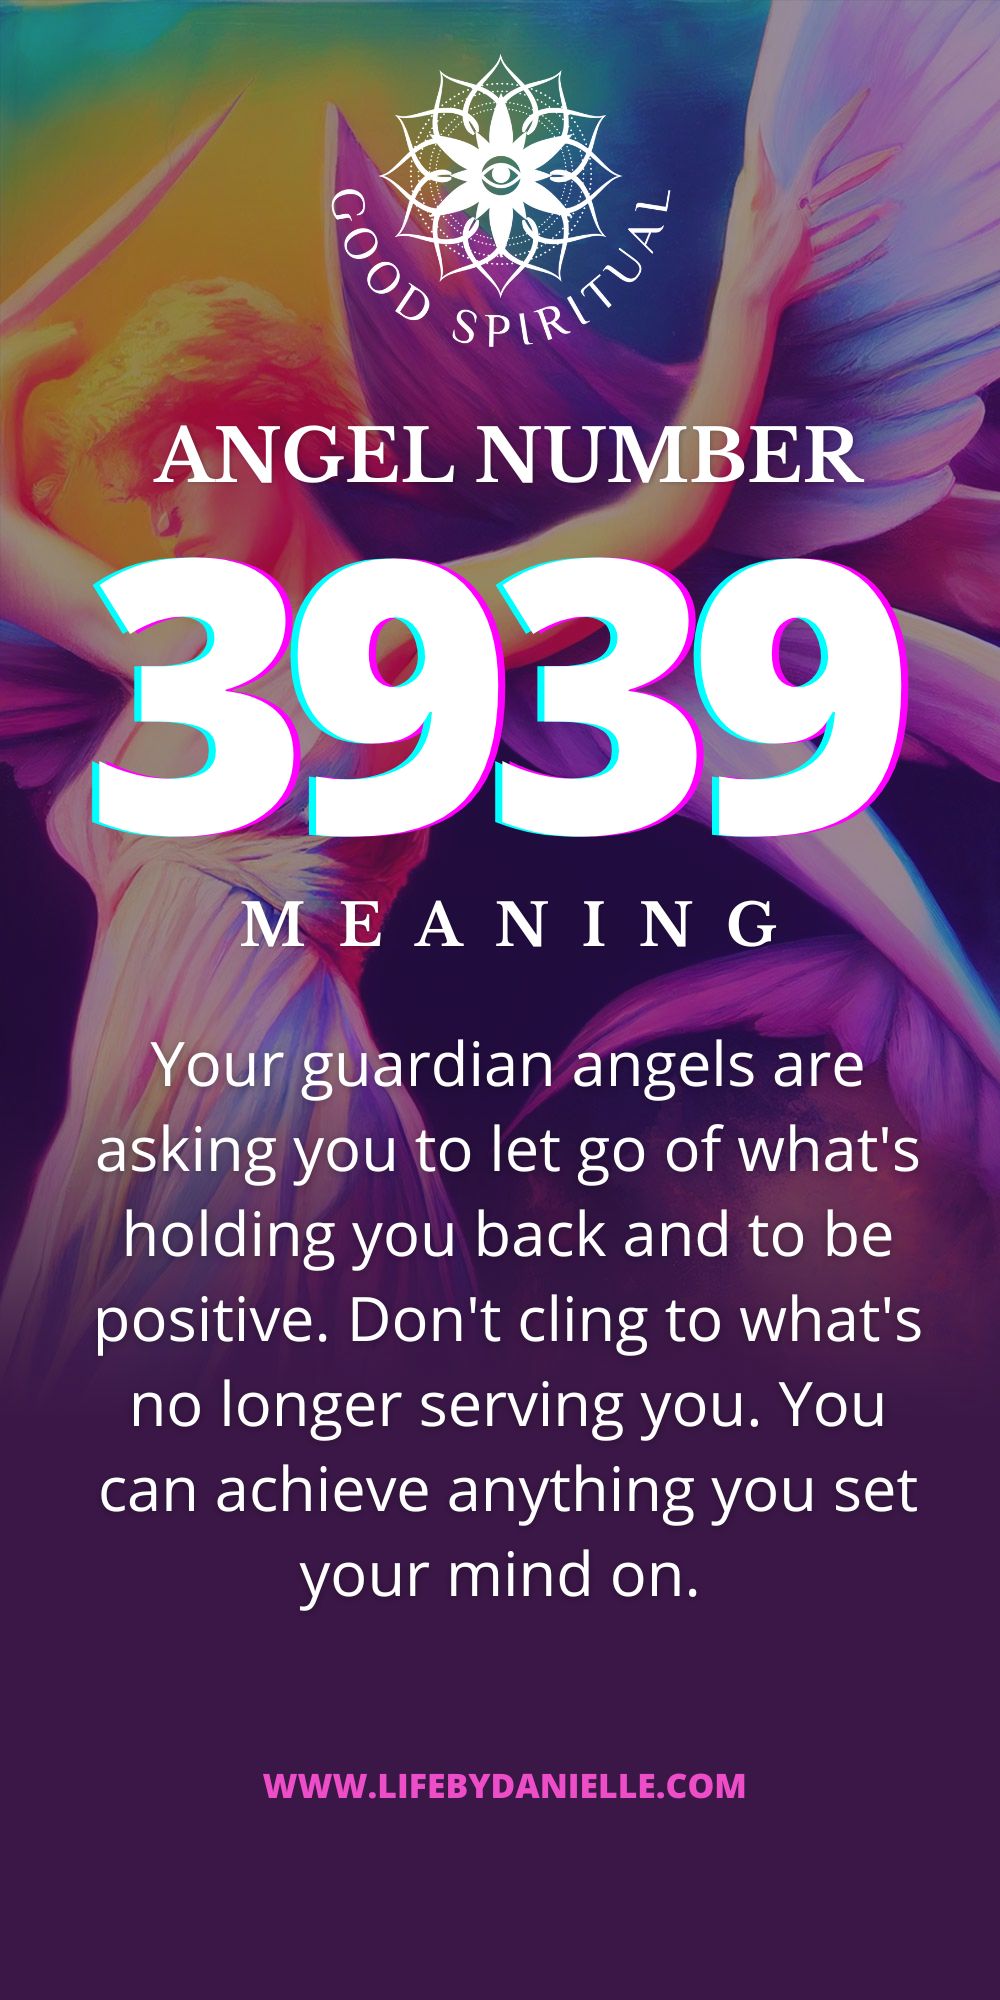 Angel Number 3939 Meaning